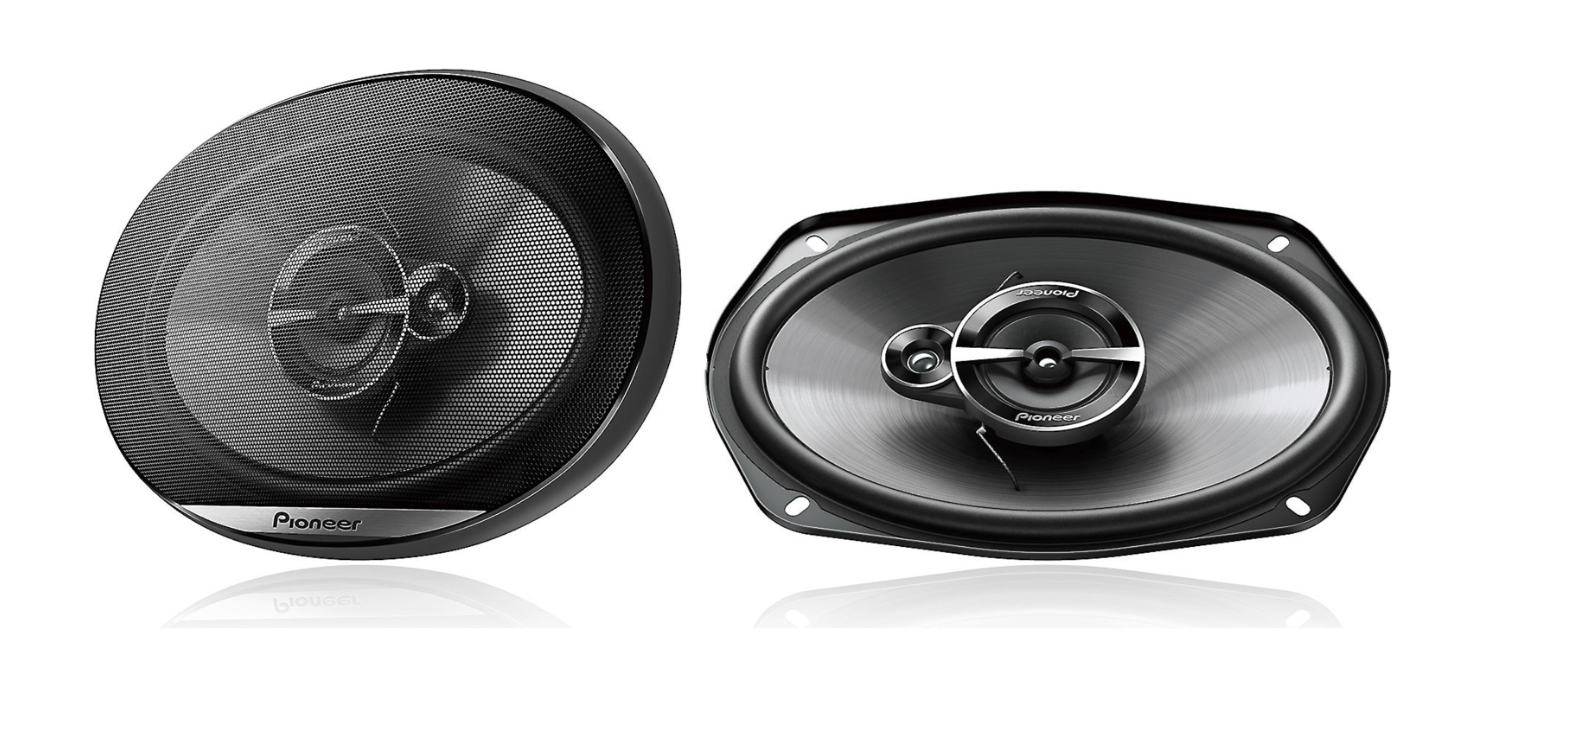 Experience Beautiful Sound with the Best 6x9 Motorcycle Speakers